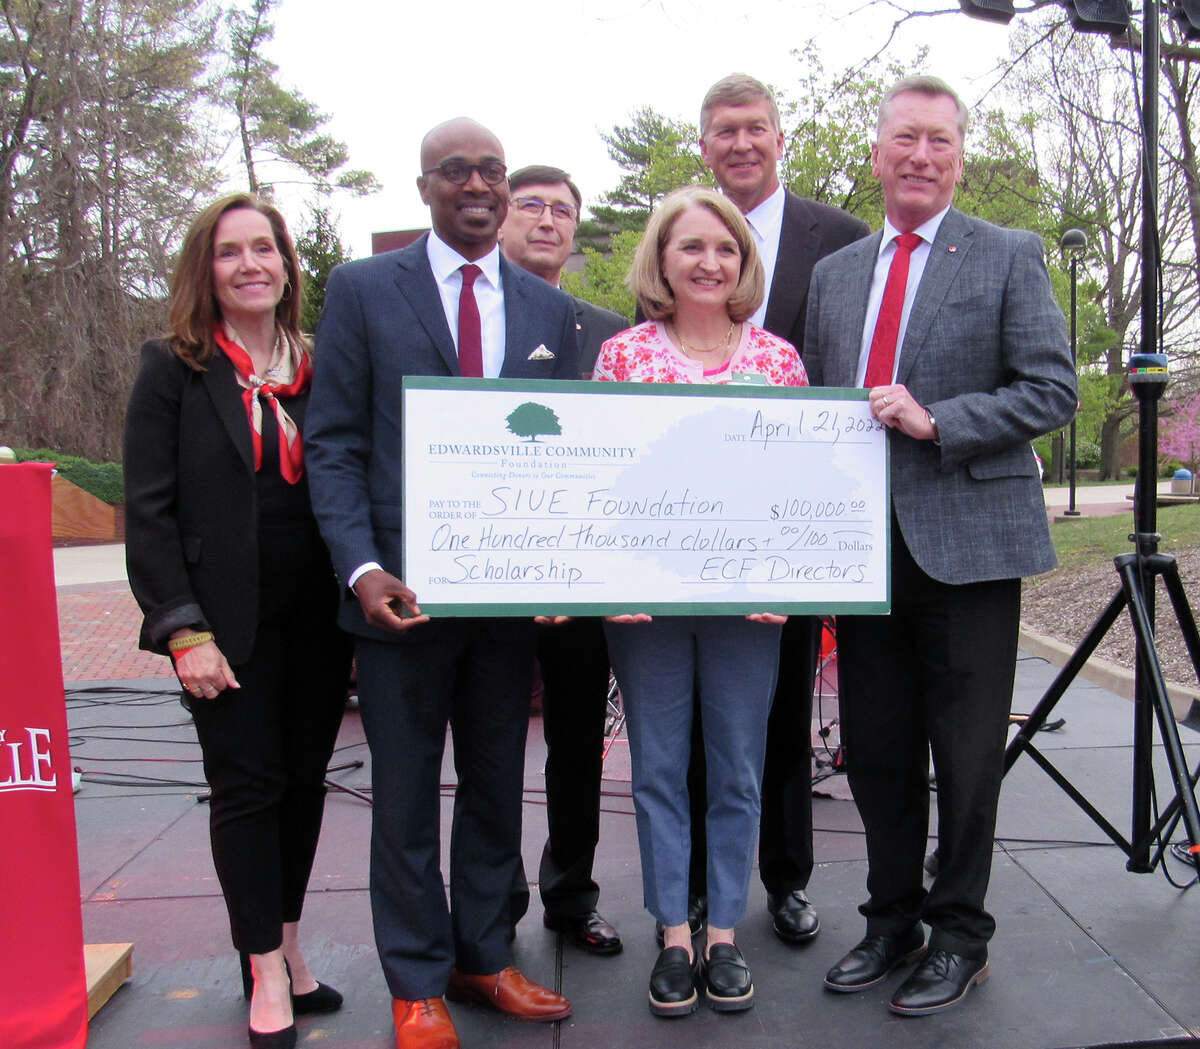 On Thursday, night, the Edwardsville Community Foundation (ECF) contributed $100,000 toward scholarship support for students to study disaster preparedness as part of the “One Day, One SIUE” Day of Giving. Left to right, ECF Chair Caryn Mefford, SIUE Chancellor James T. Minor, School of Engineering Dean Cem Karacal, ECF Executive Director Pamela Farrar, SIUE Vice Chancellor for Student Affairs Jeffrey Waple, and ECF Vice-Chair Rich Walker.